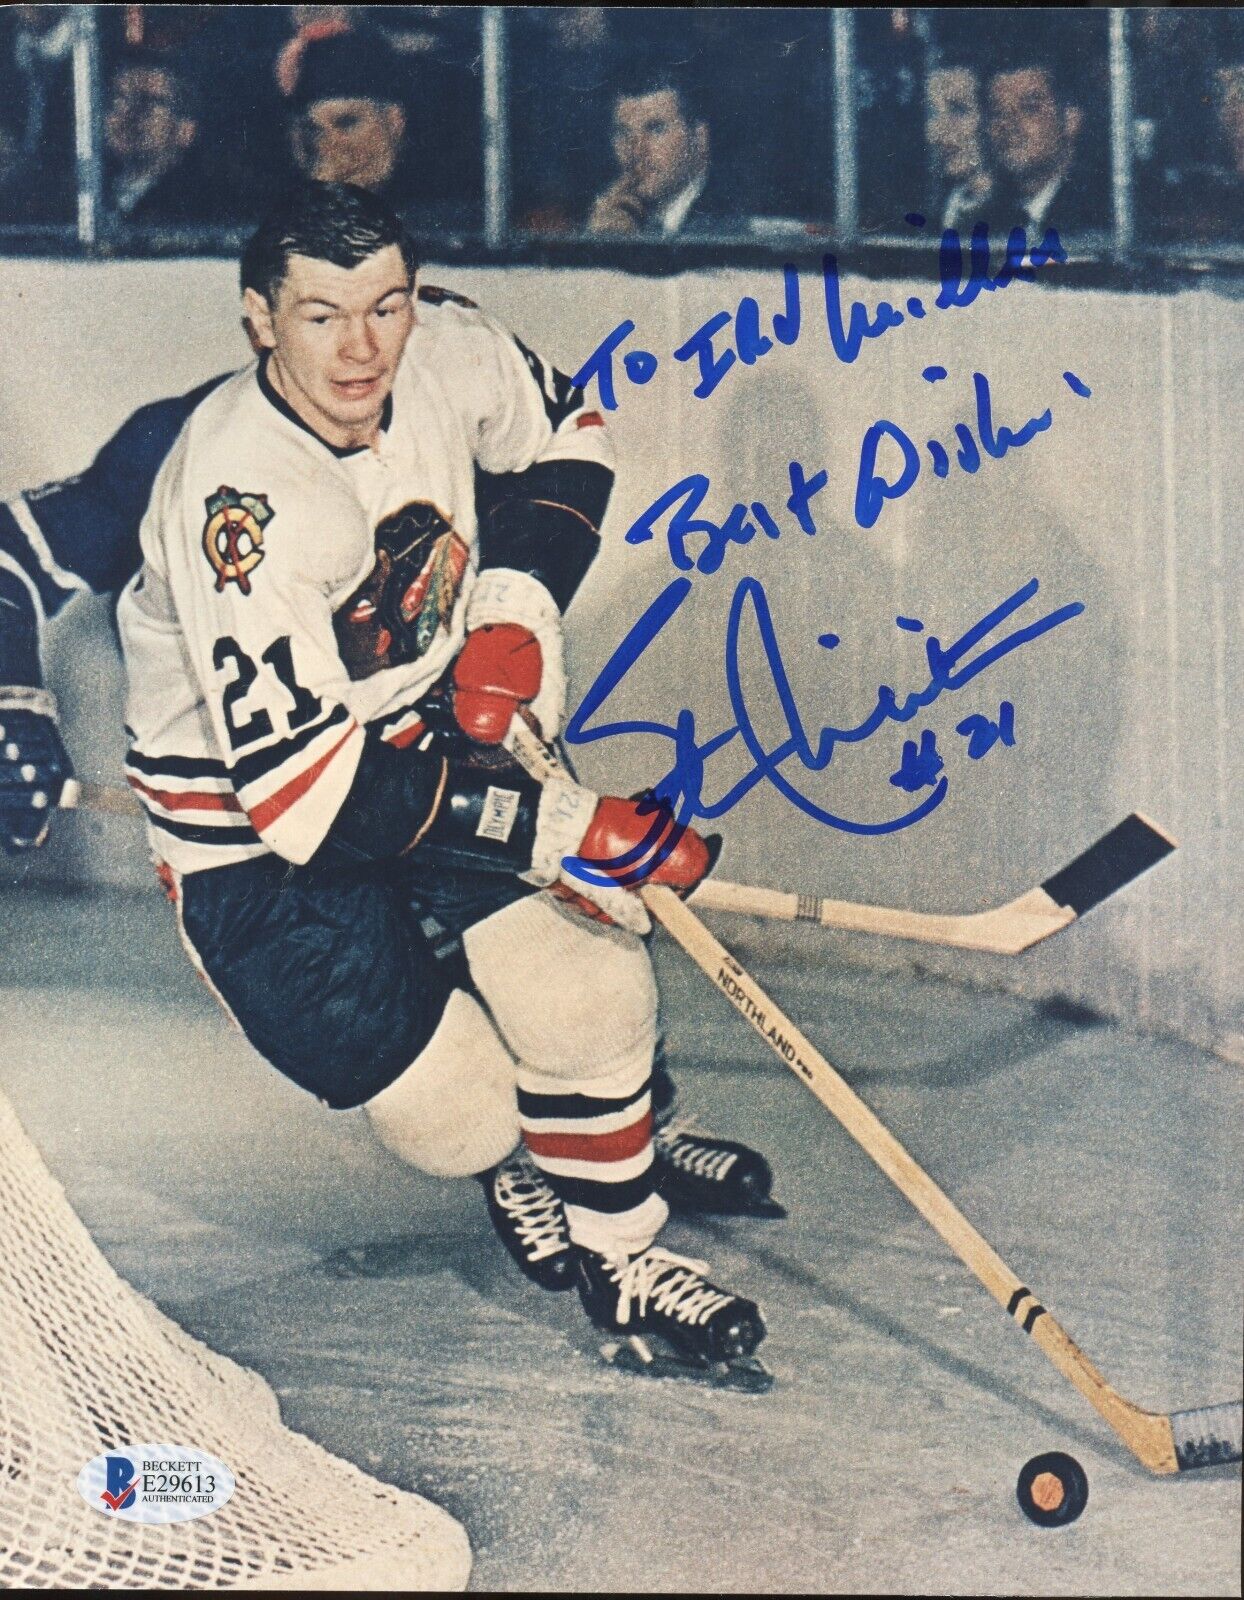 Stan Mikita d2018 signed autograph auto 8x10 Photo Hockey NHL BAS Certified